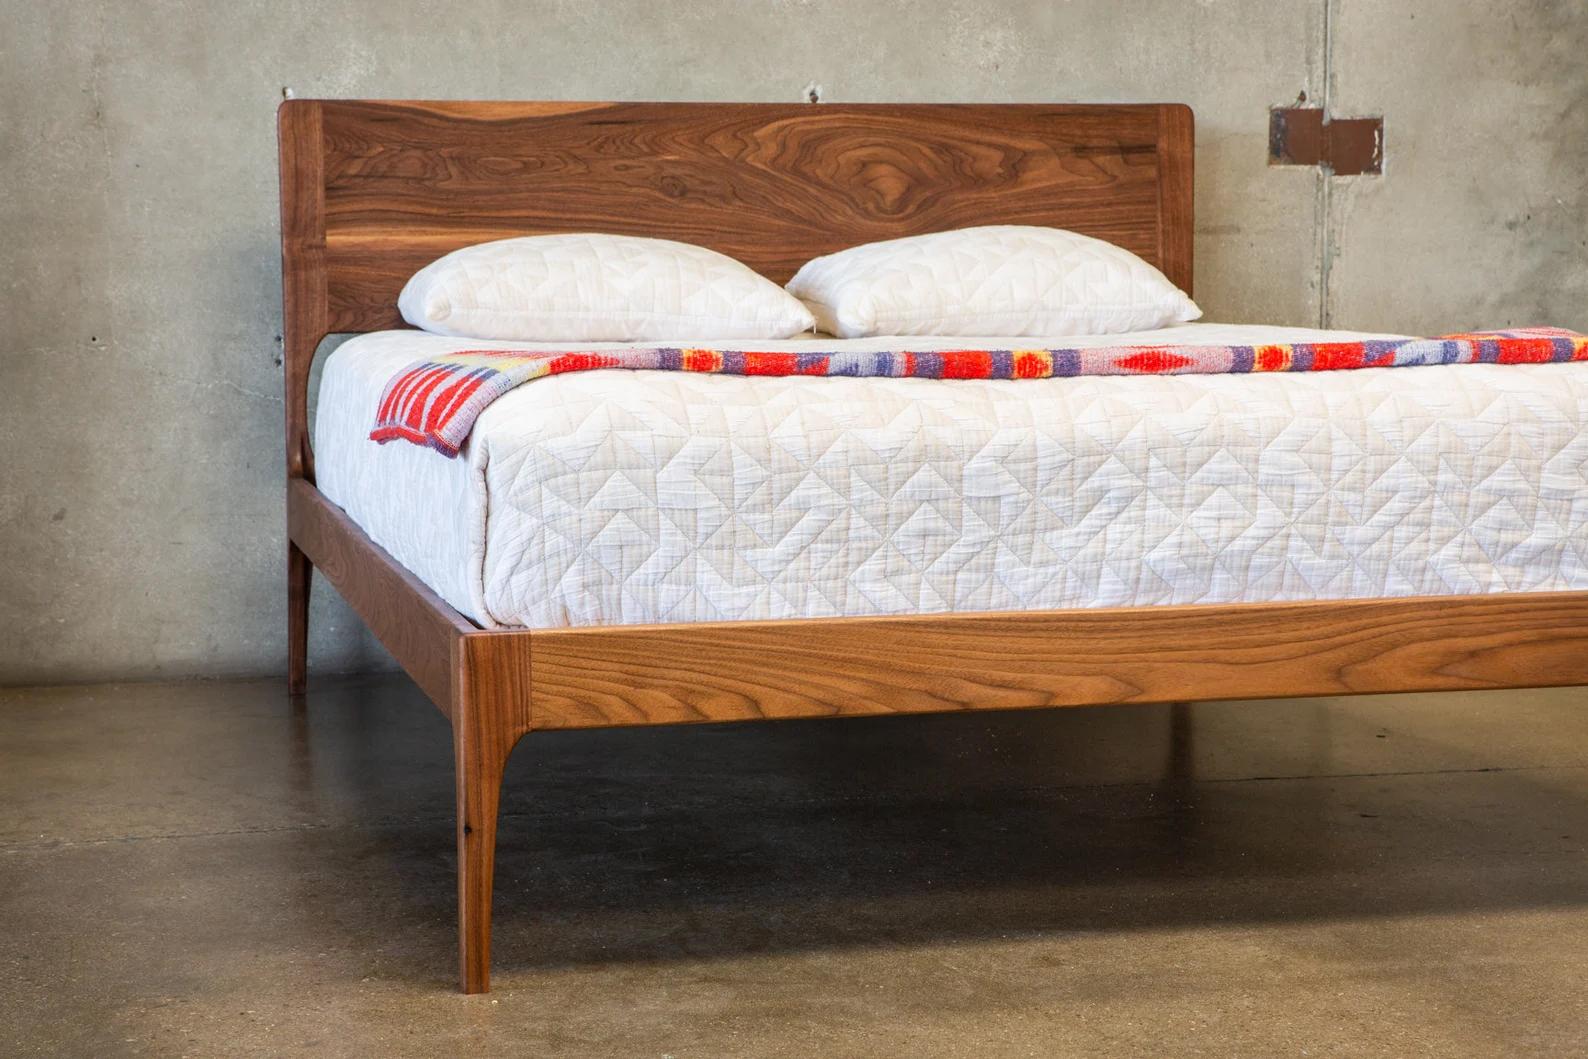 The Alto Bed takes it's cues from my Classic Modern Design, with the same simple, continuous lines. But the legs are brought in line with the frame, making for a more compact footprint. This bed can be built in any size and in any species of wood,